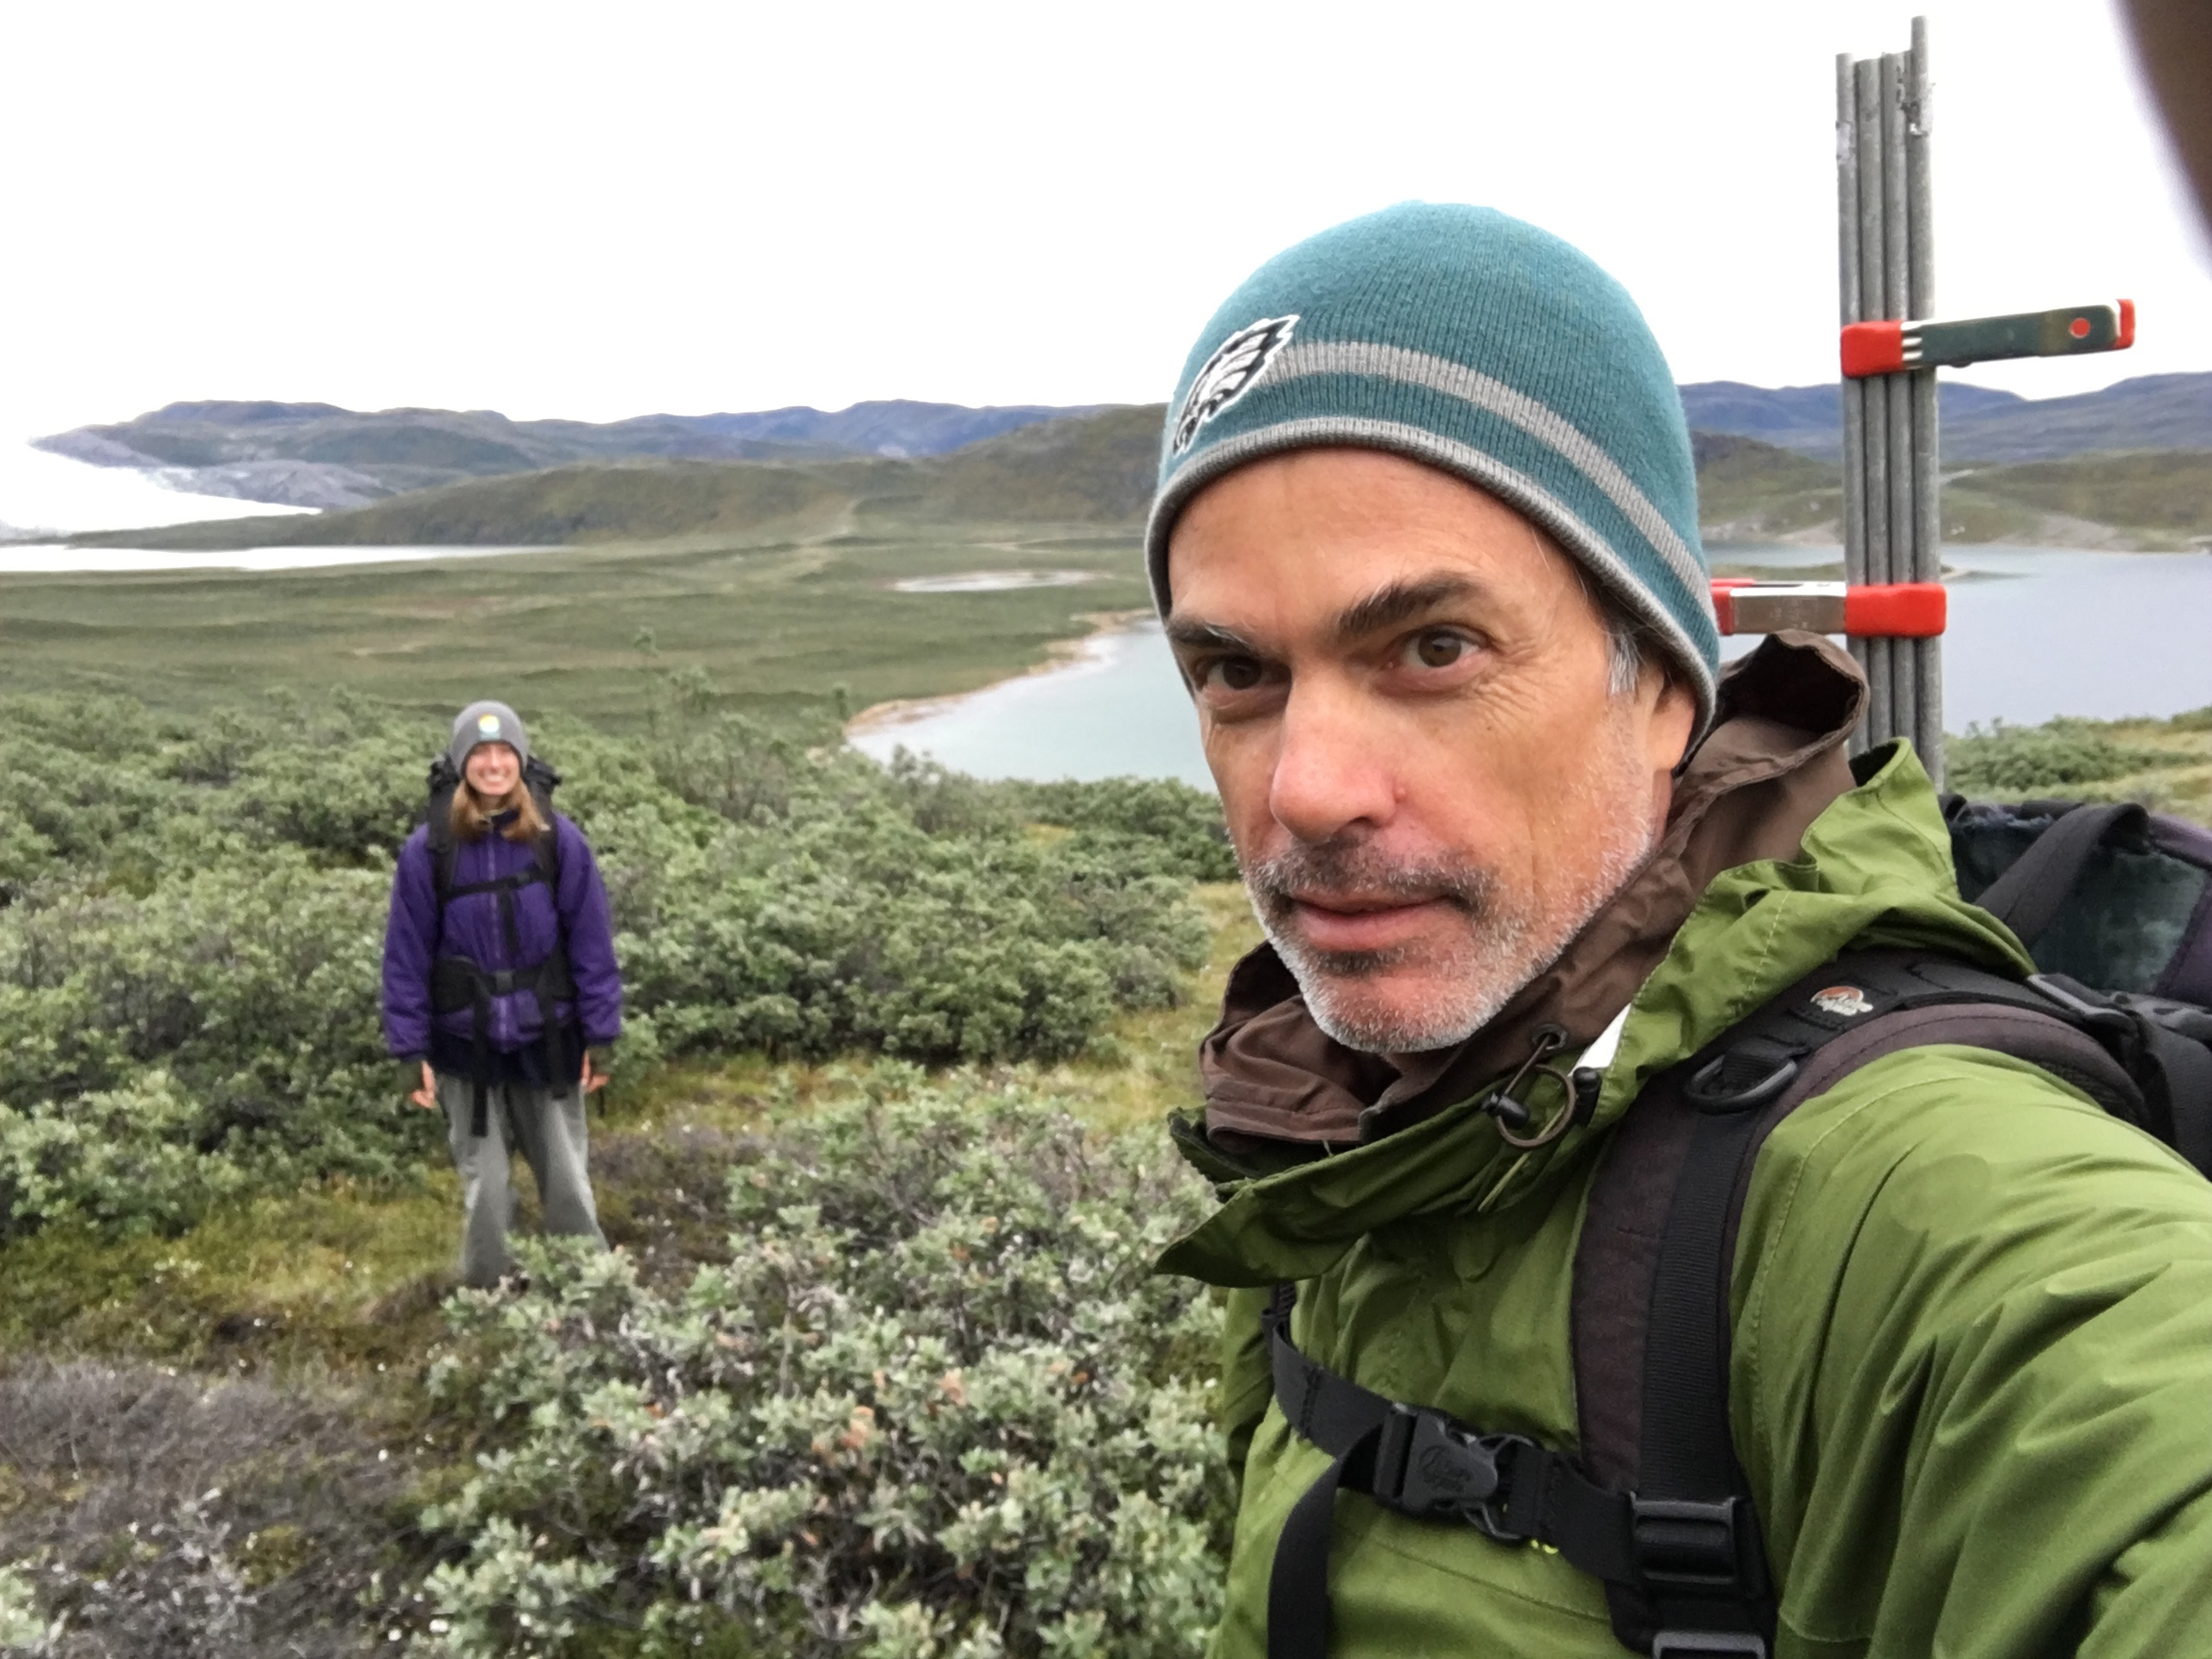 Eric Post takes selfie at his field site in Arctic Greenland, his daughter in the background